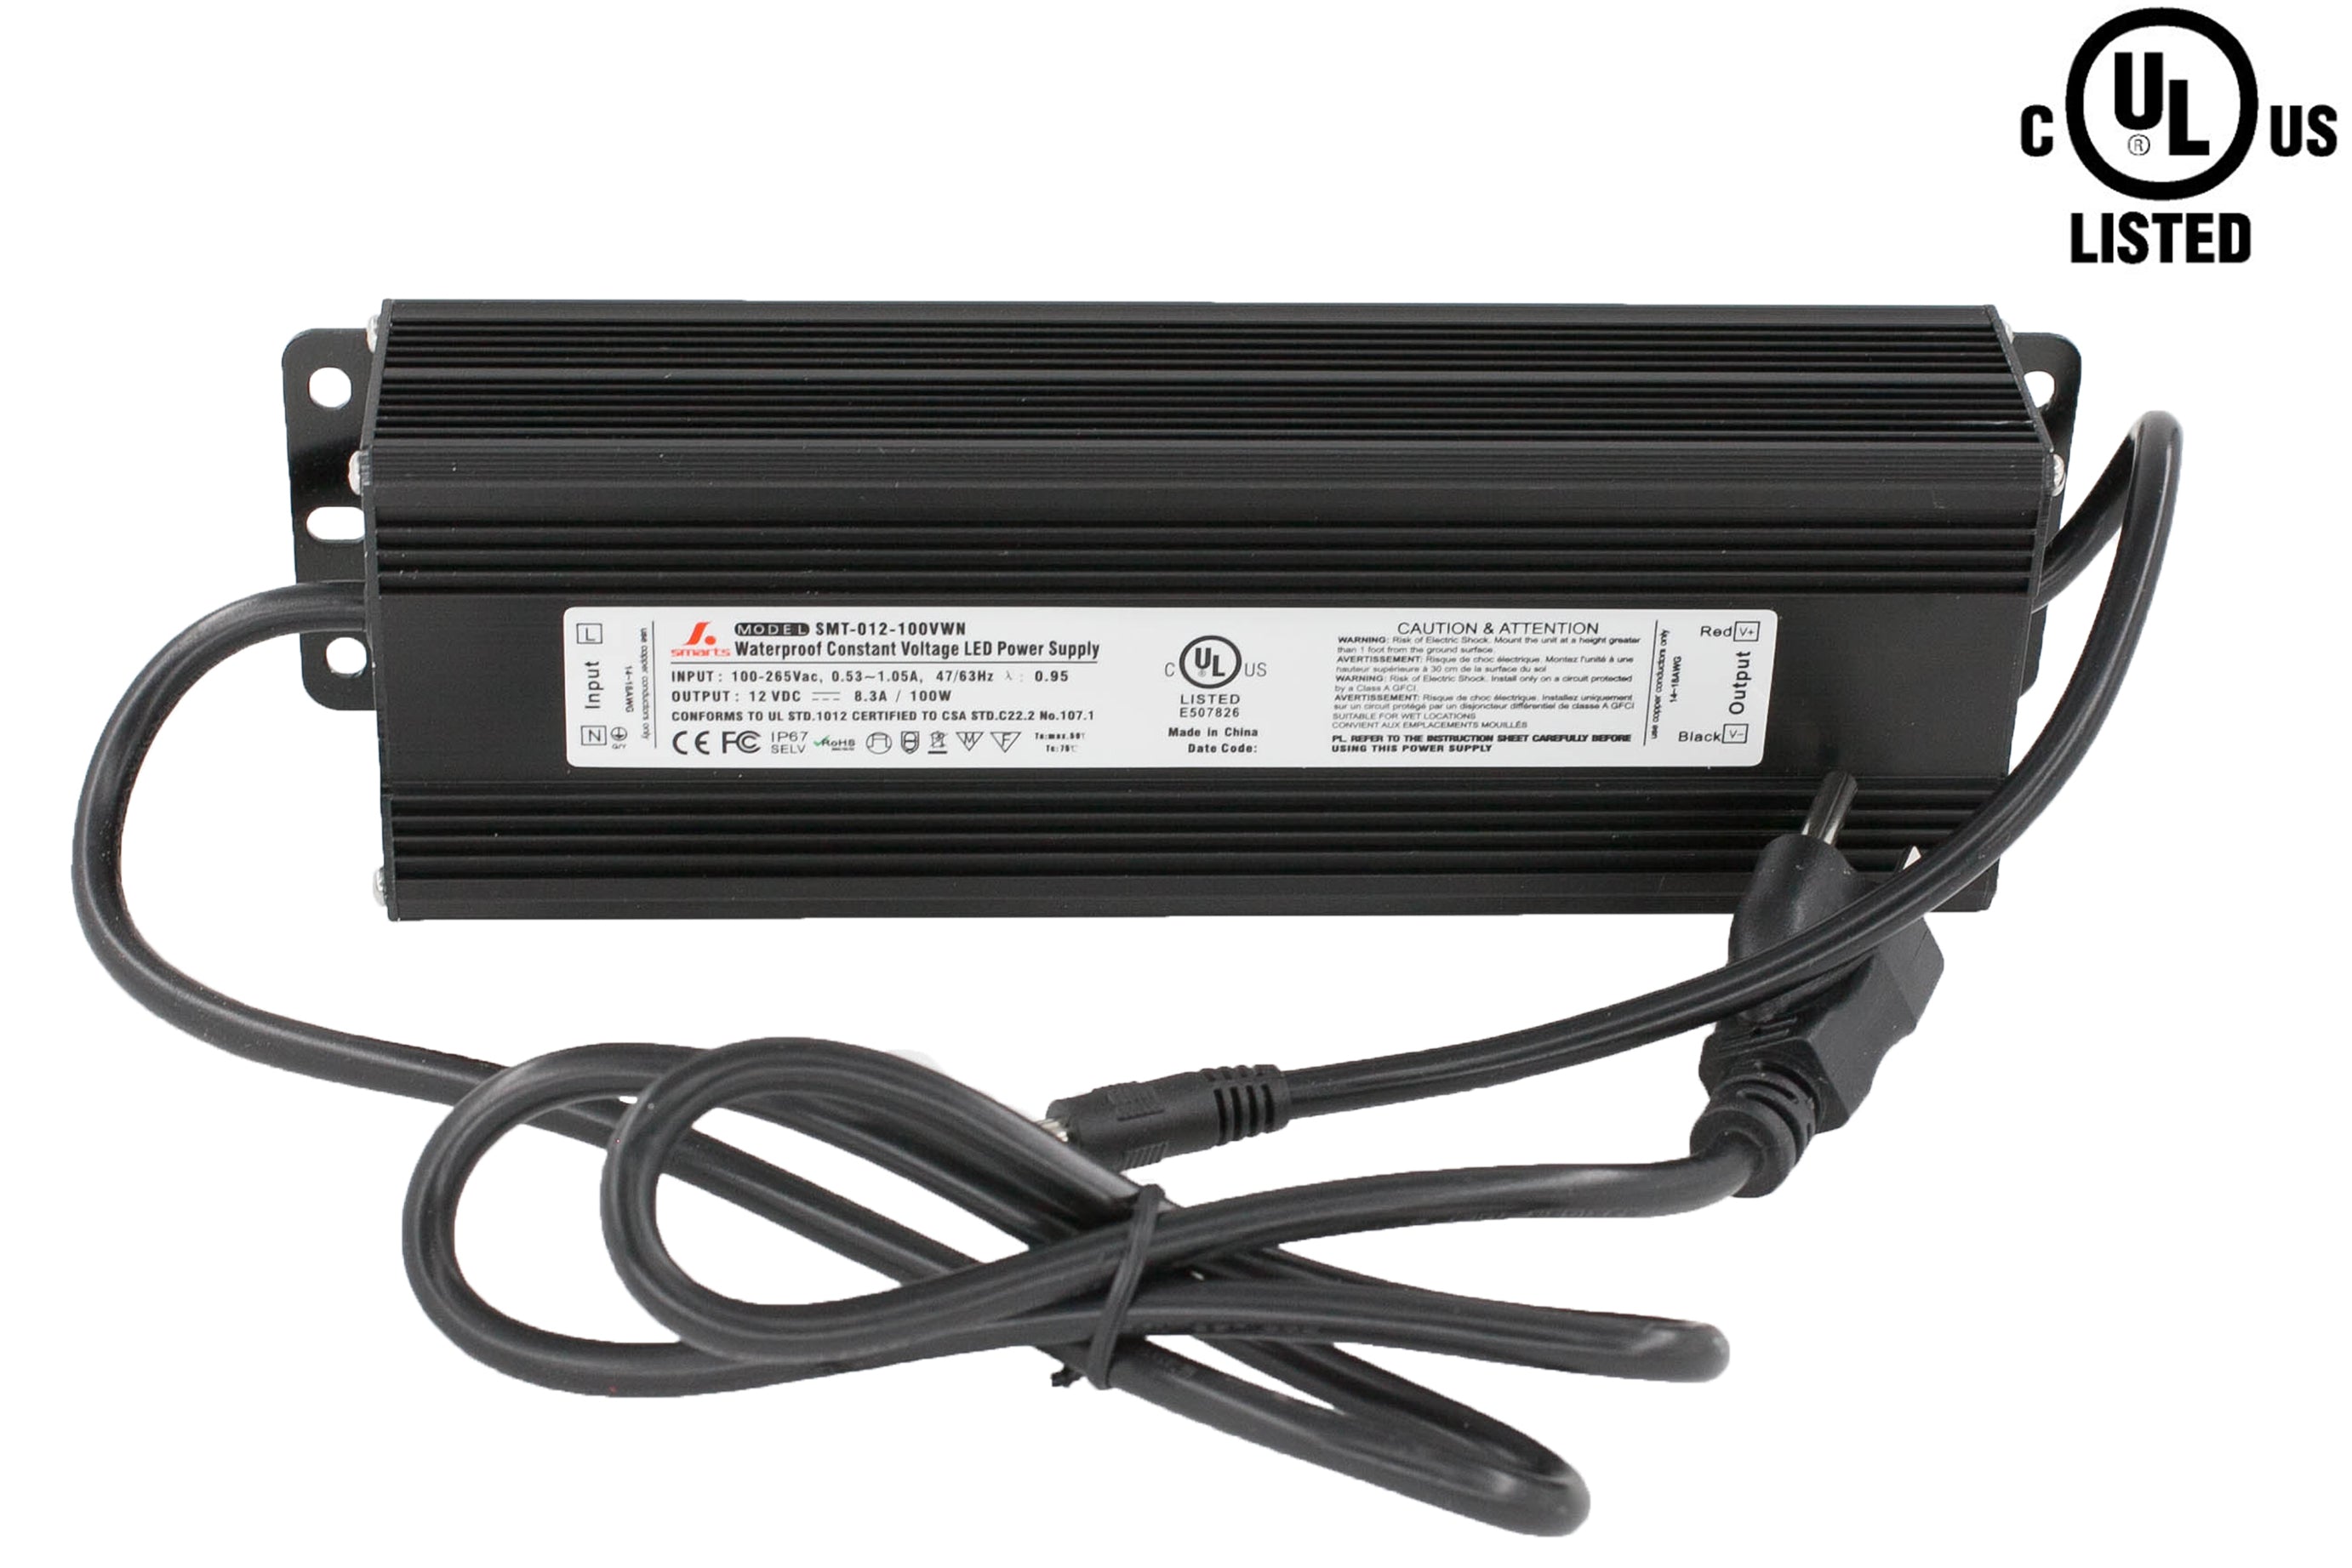 UL Listed 12v 8.3 Amps 100w Constant Voltage waterproof Power Supply Driver